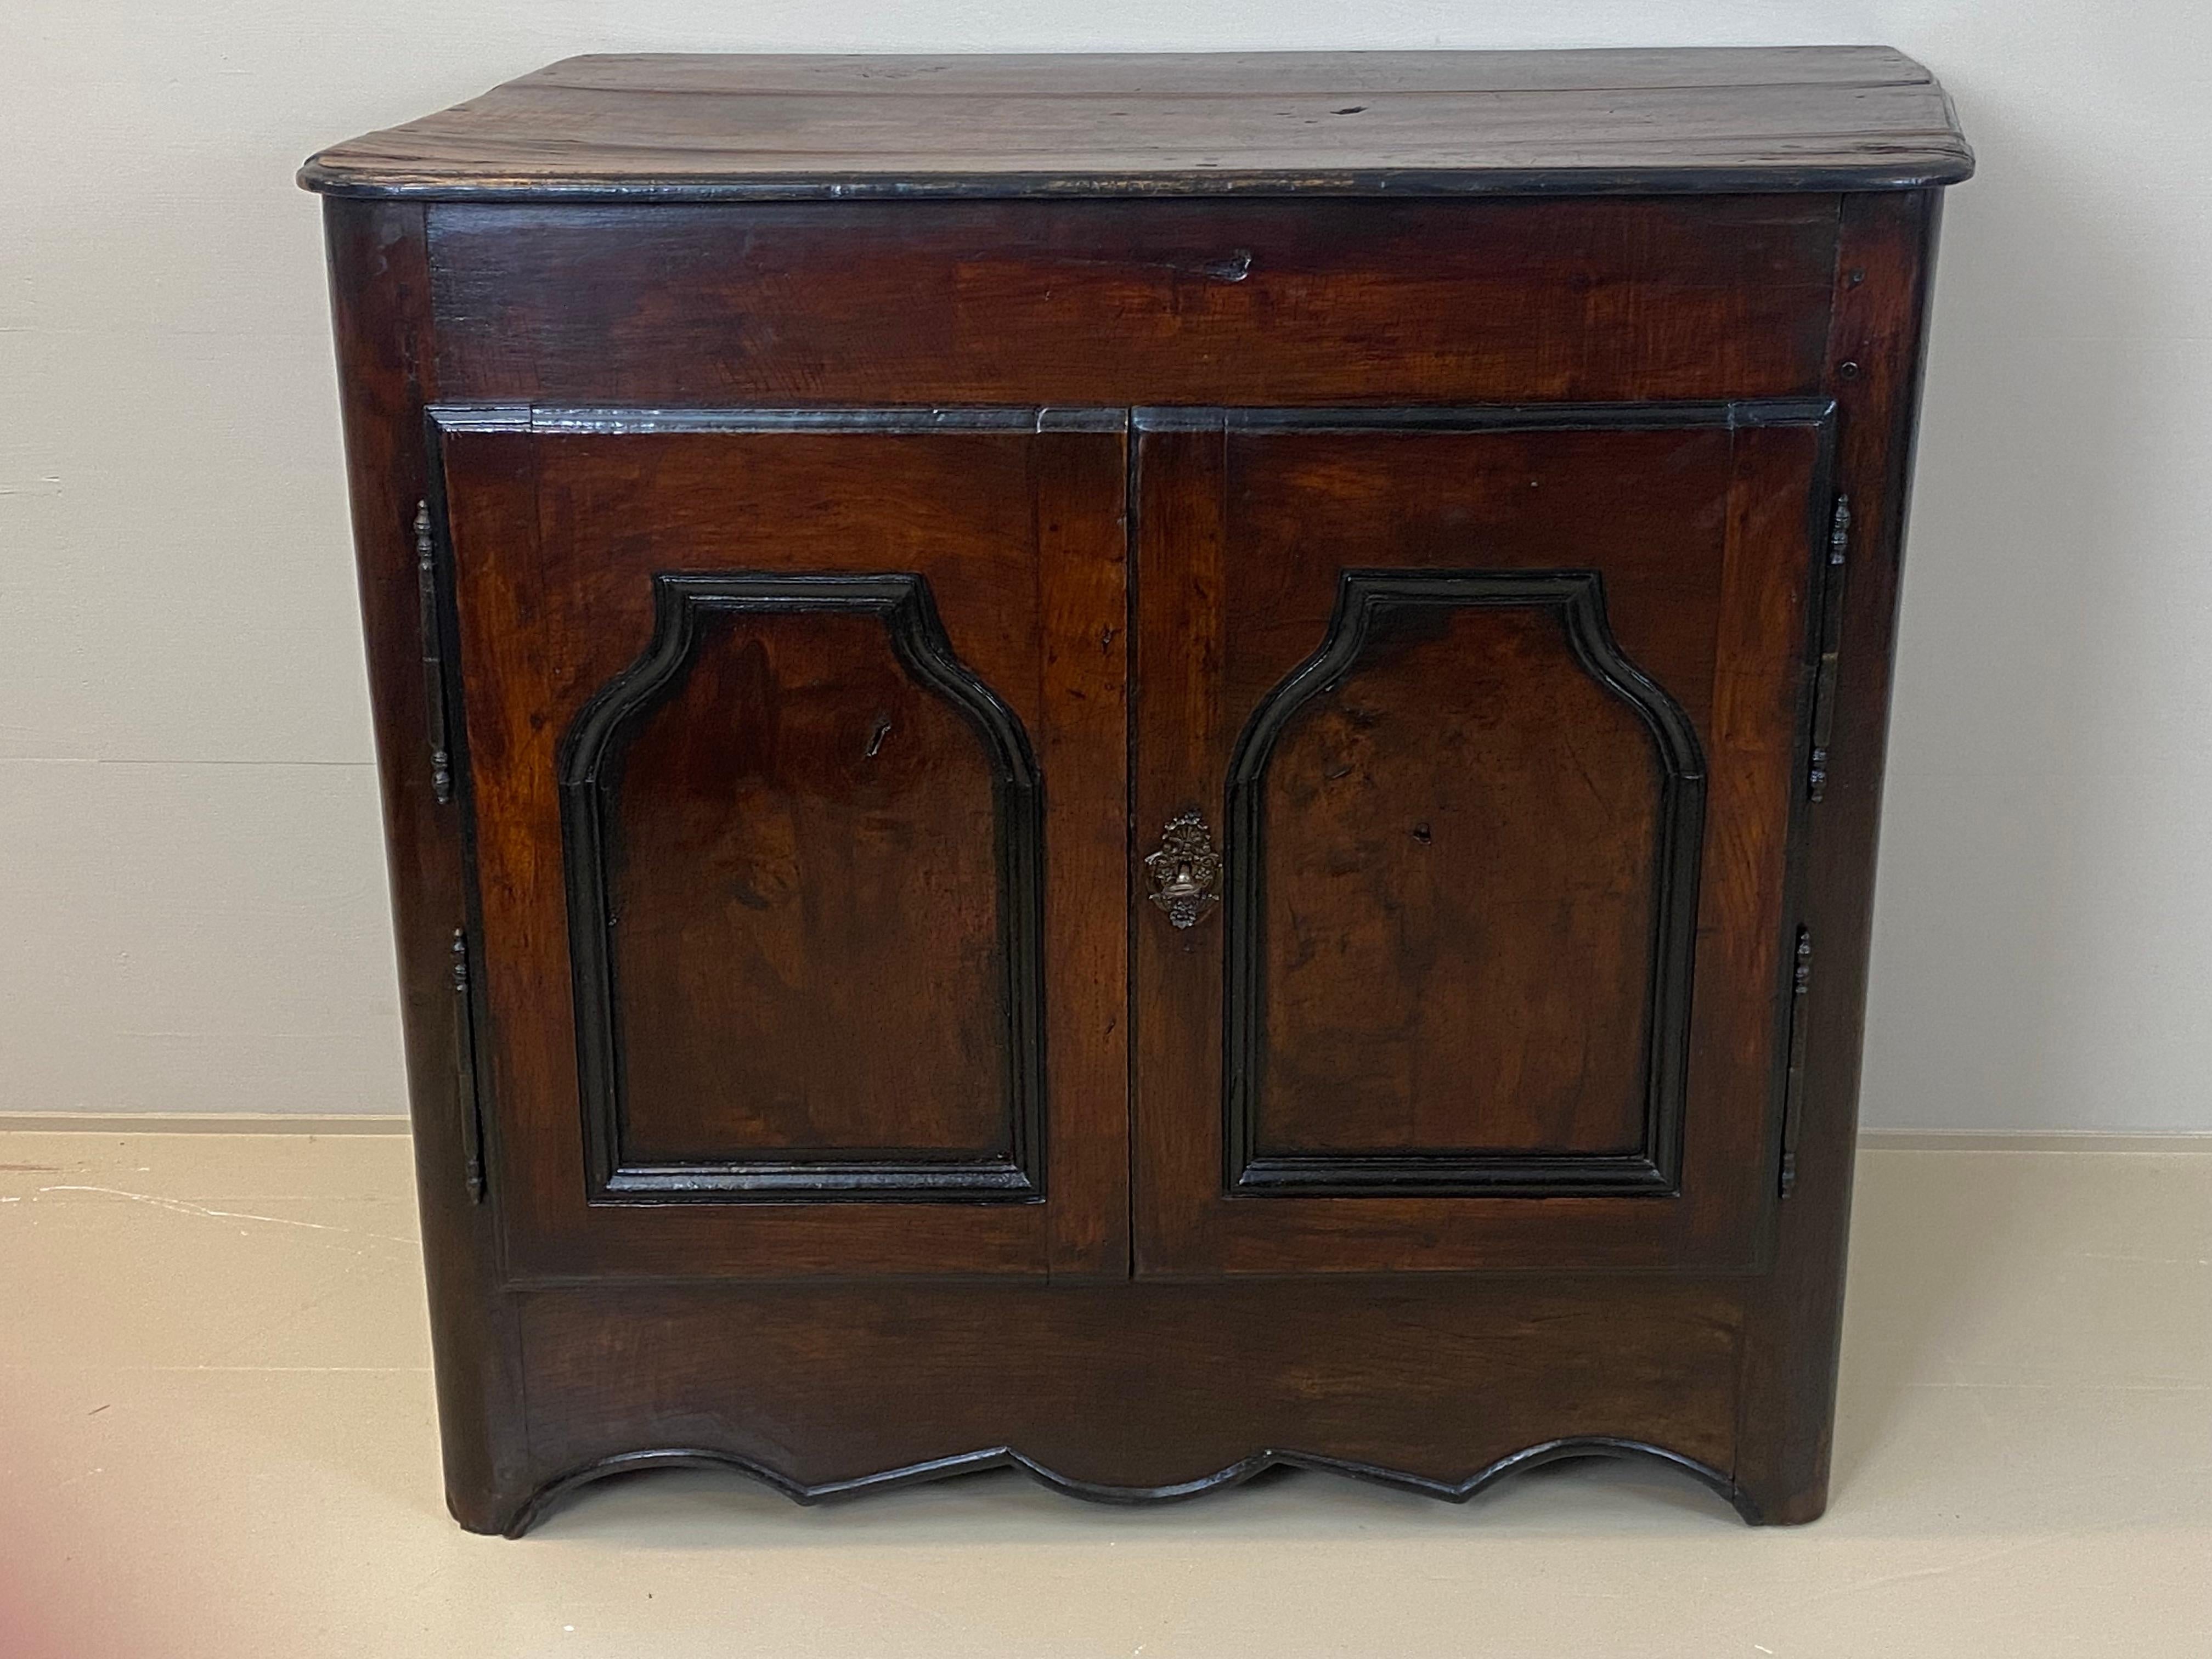 Mid-18th Century Small French Country Style Antique Cabinet with 2 doors in a dark wood 